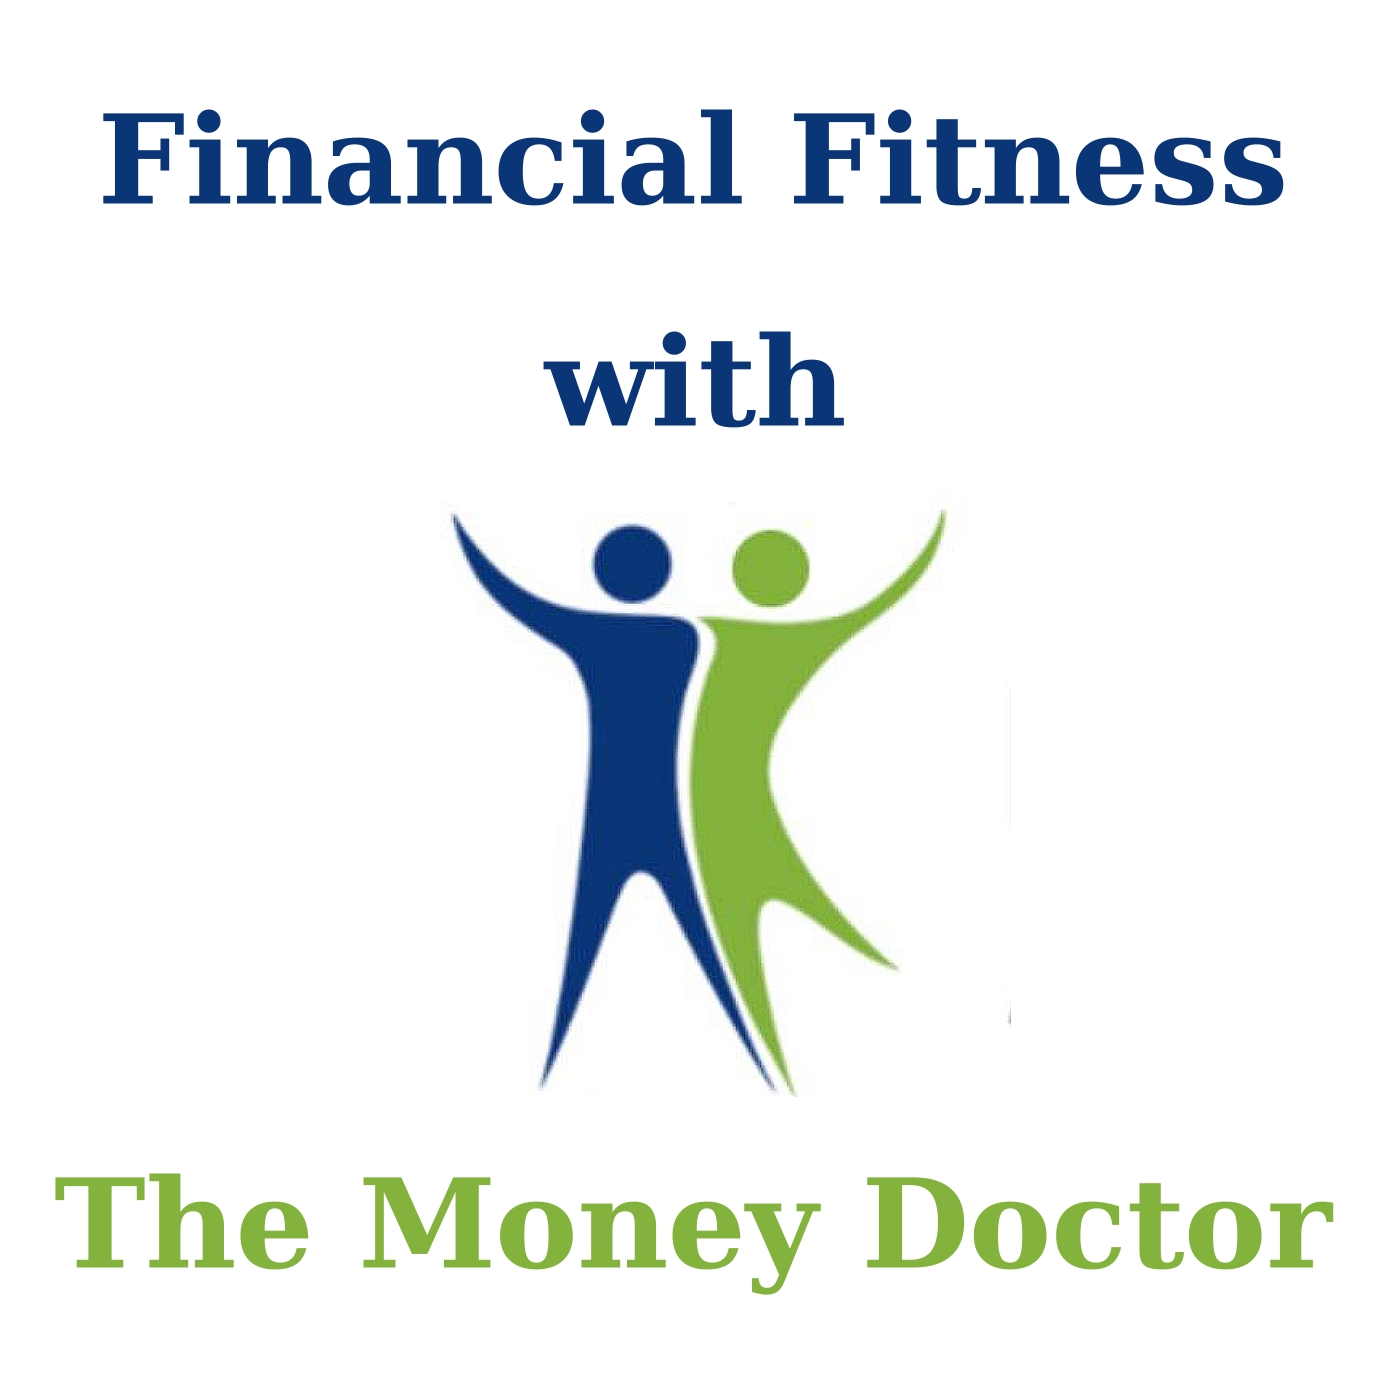 Financial Fitness with The Money Doctor